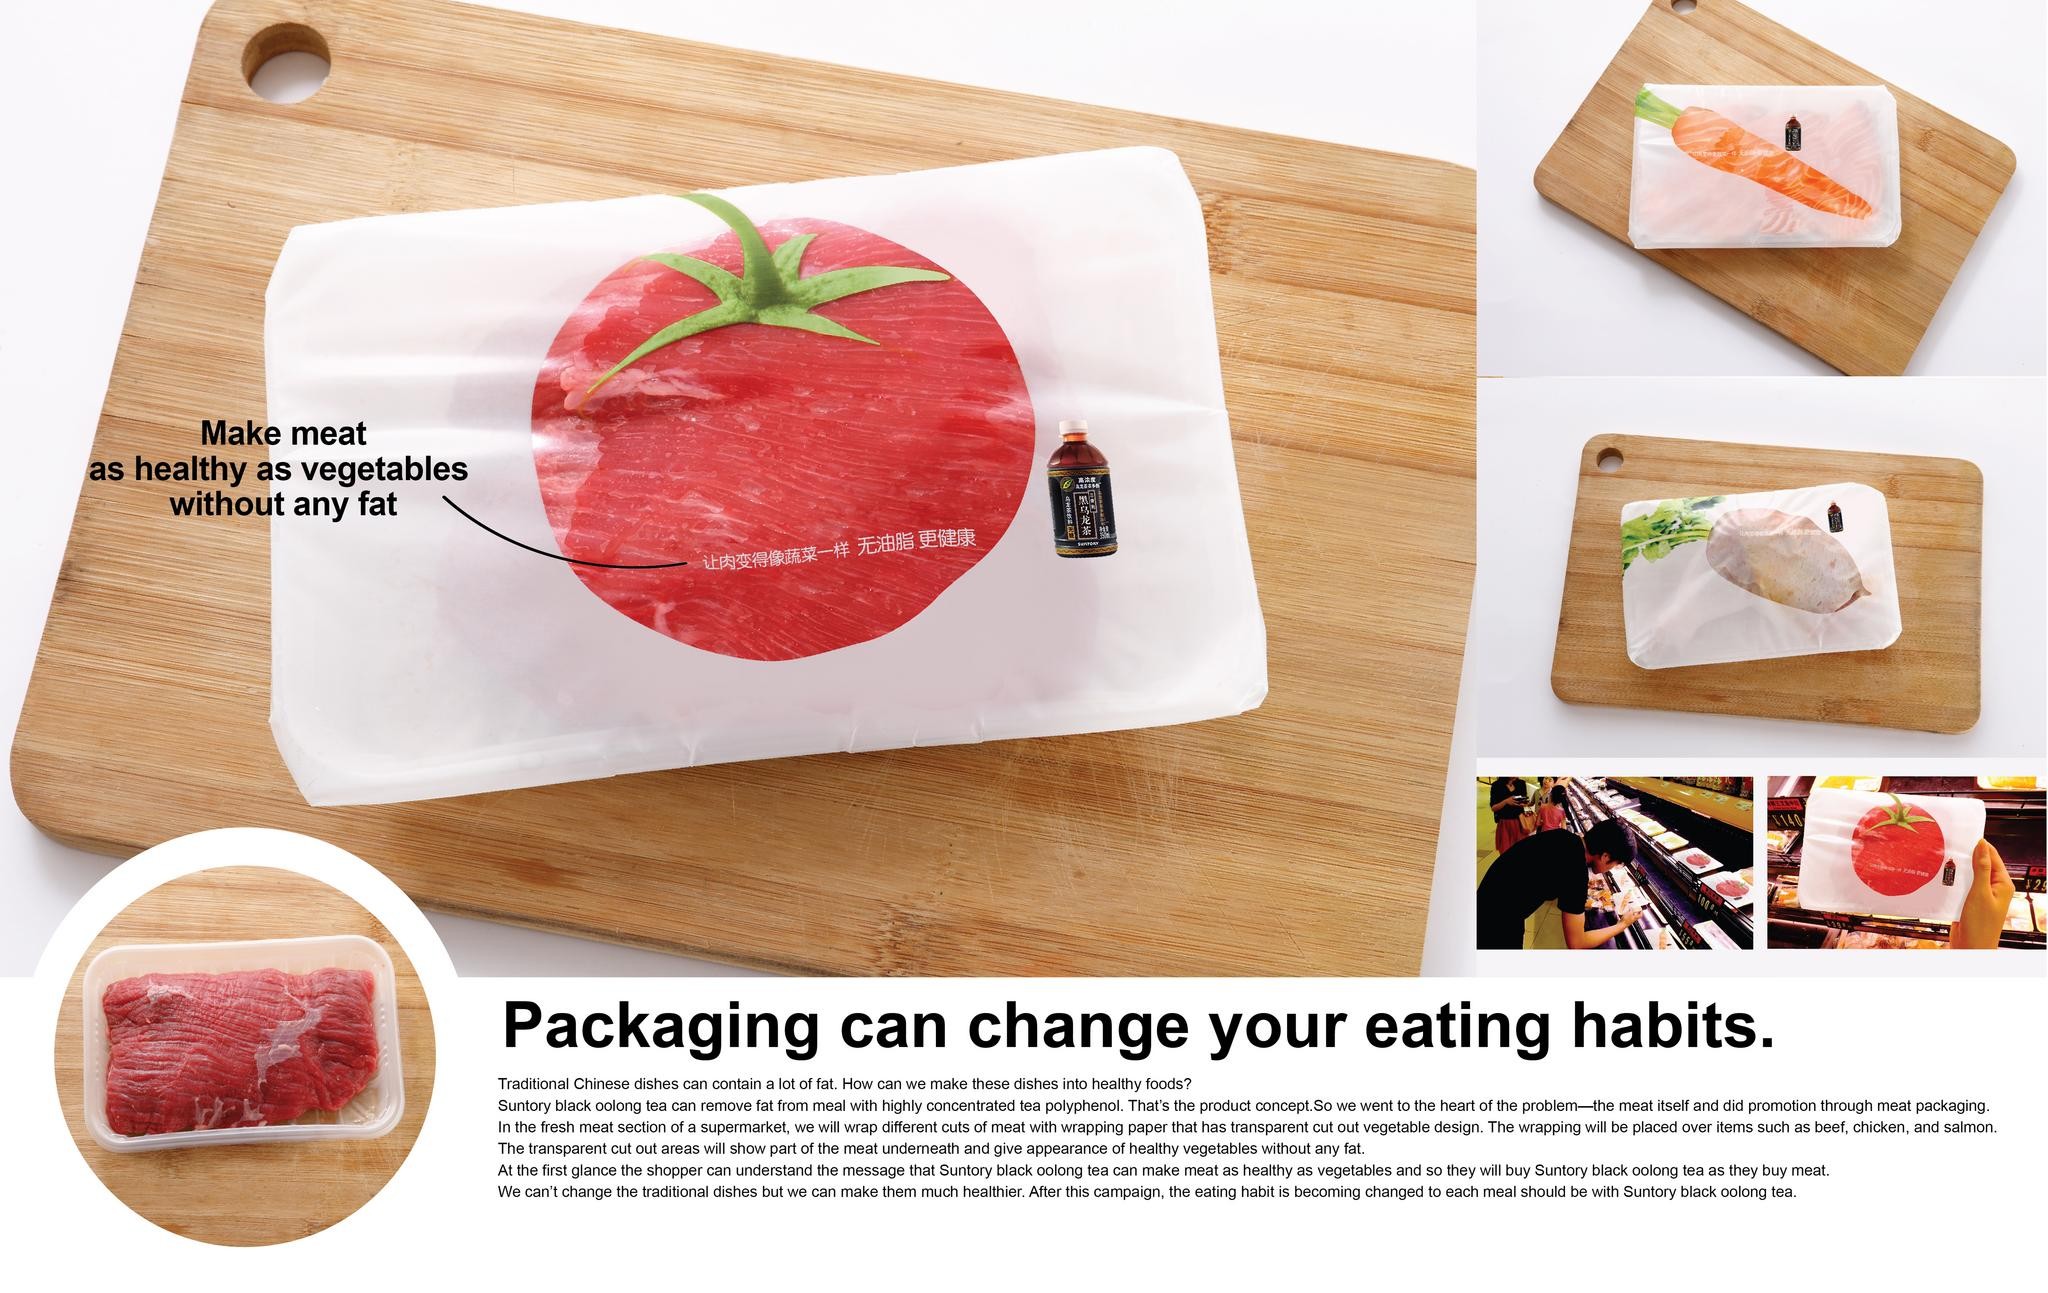 PACKAGE CAN CHANGE THE EATING HABIT